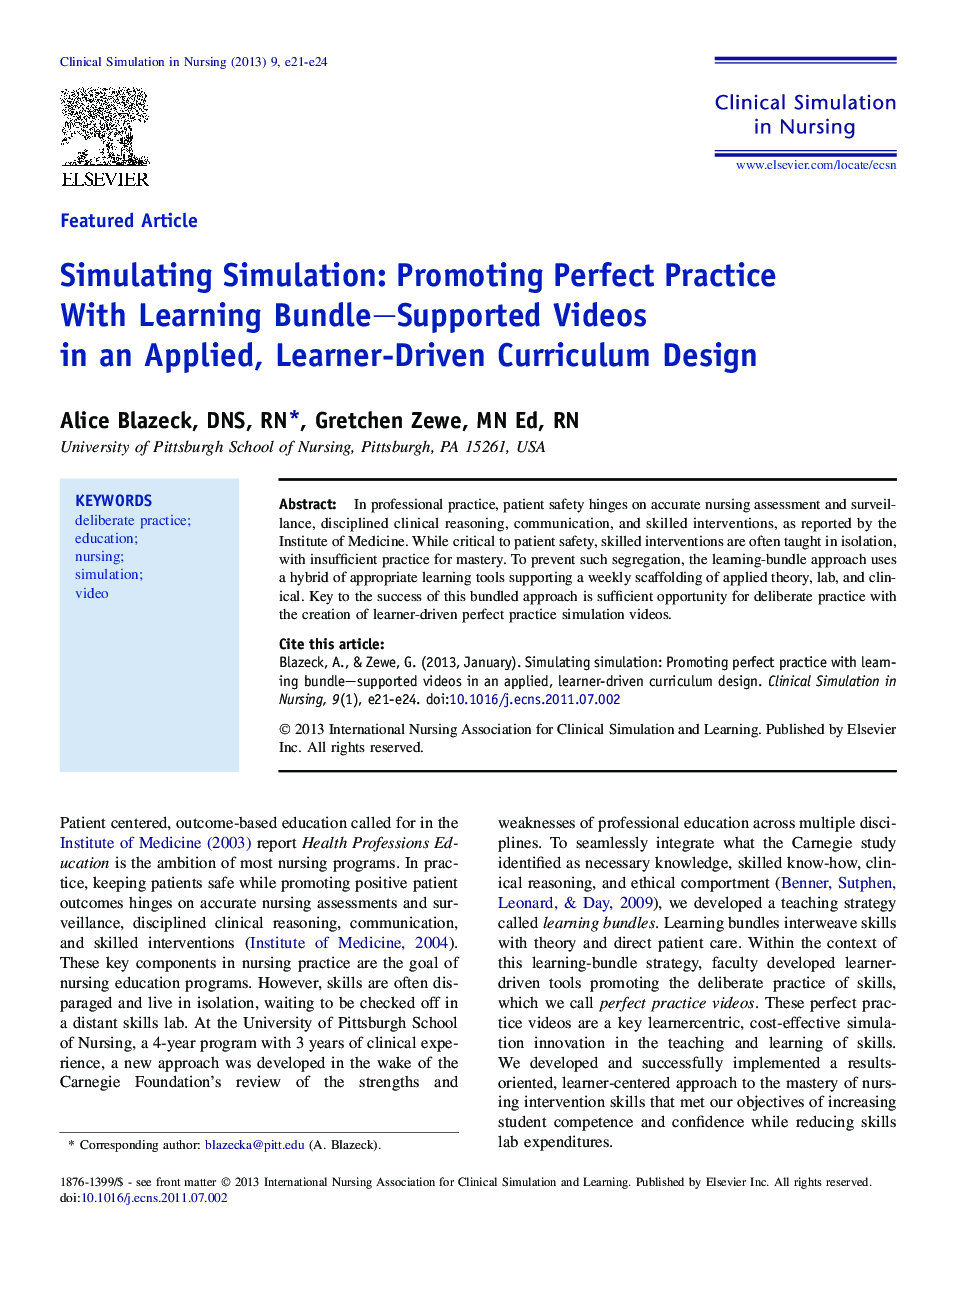 Simulating Simulation: Promoting Perfect Practice With Learning Bundle–Supported Videos in an Applied, Learner-Driven Curriculum Design